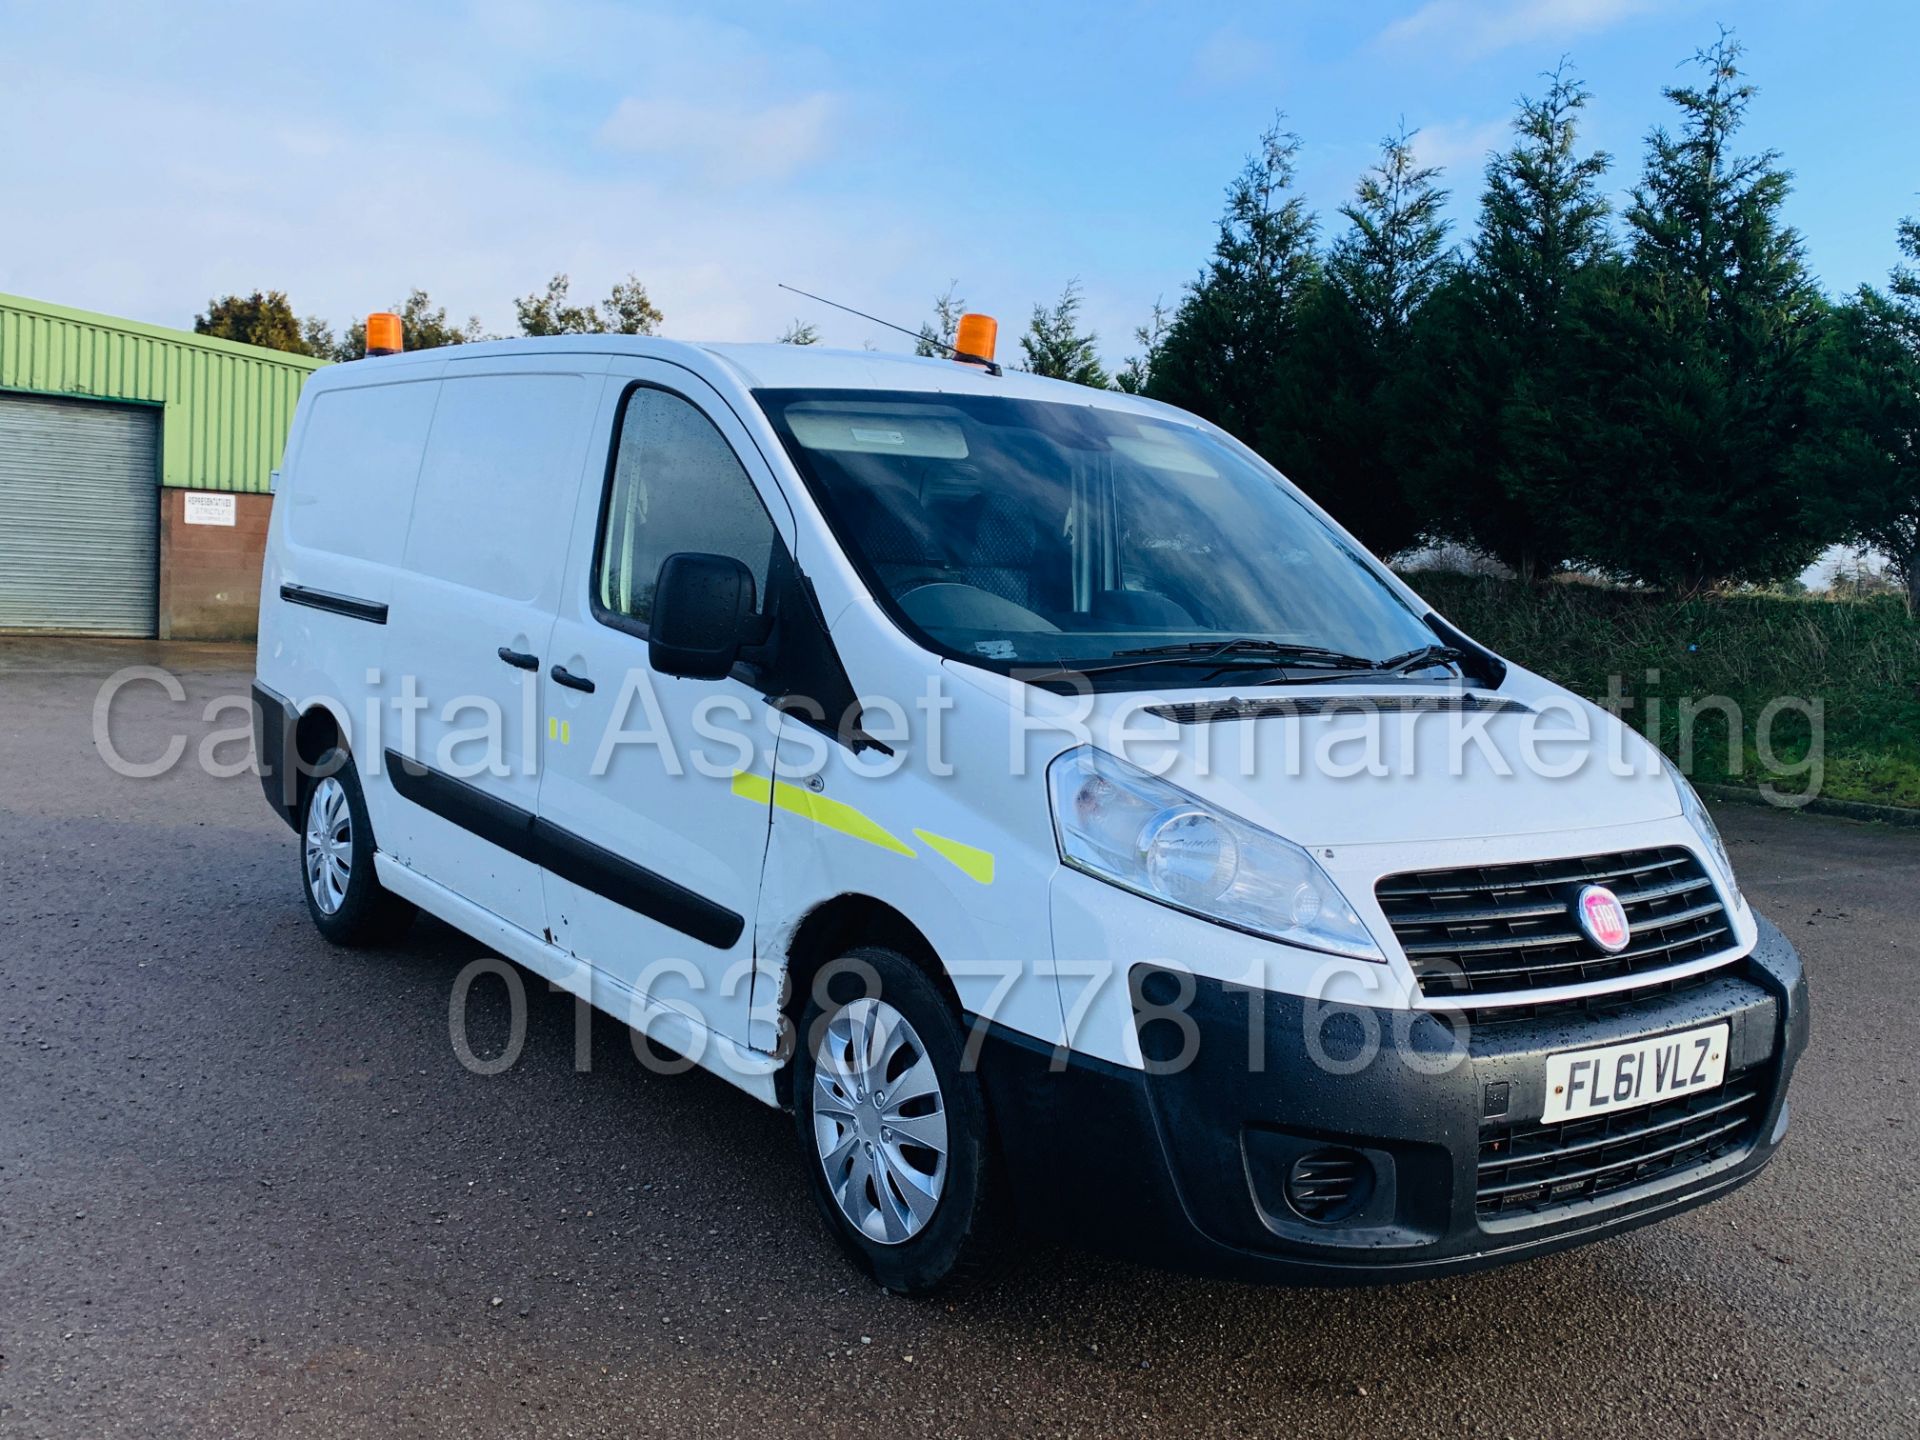 FIAT SCUDO *COMFORT EDITION* LWB (2012 MODEL) '2.0 DIESEL - 120 BHP - 6 SPEED' *AIR CON* (1 OWNER) - Image 11 of 37